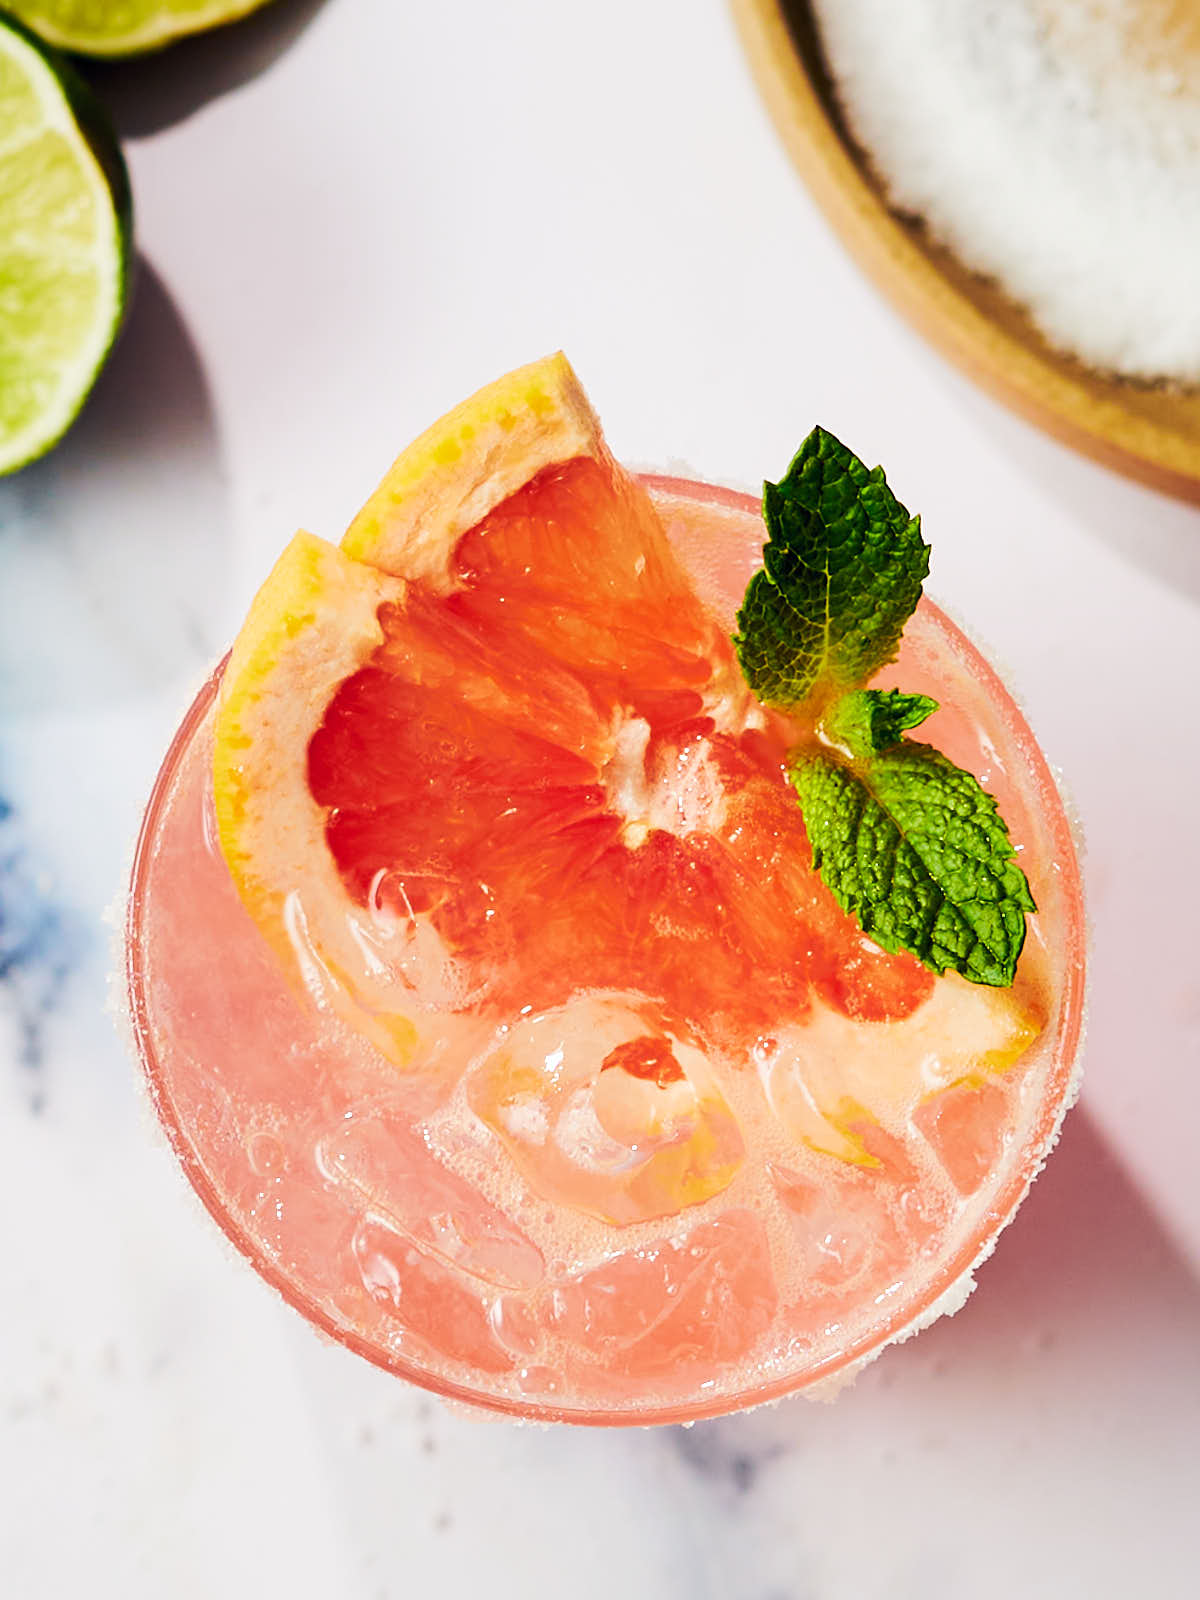 A glass of Grapefruit Paloma Cocktail with a slice of grapefruit and mint.